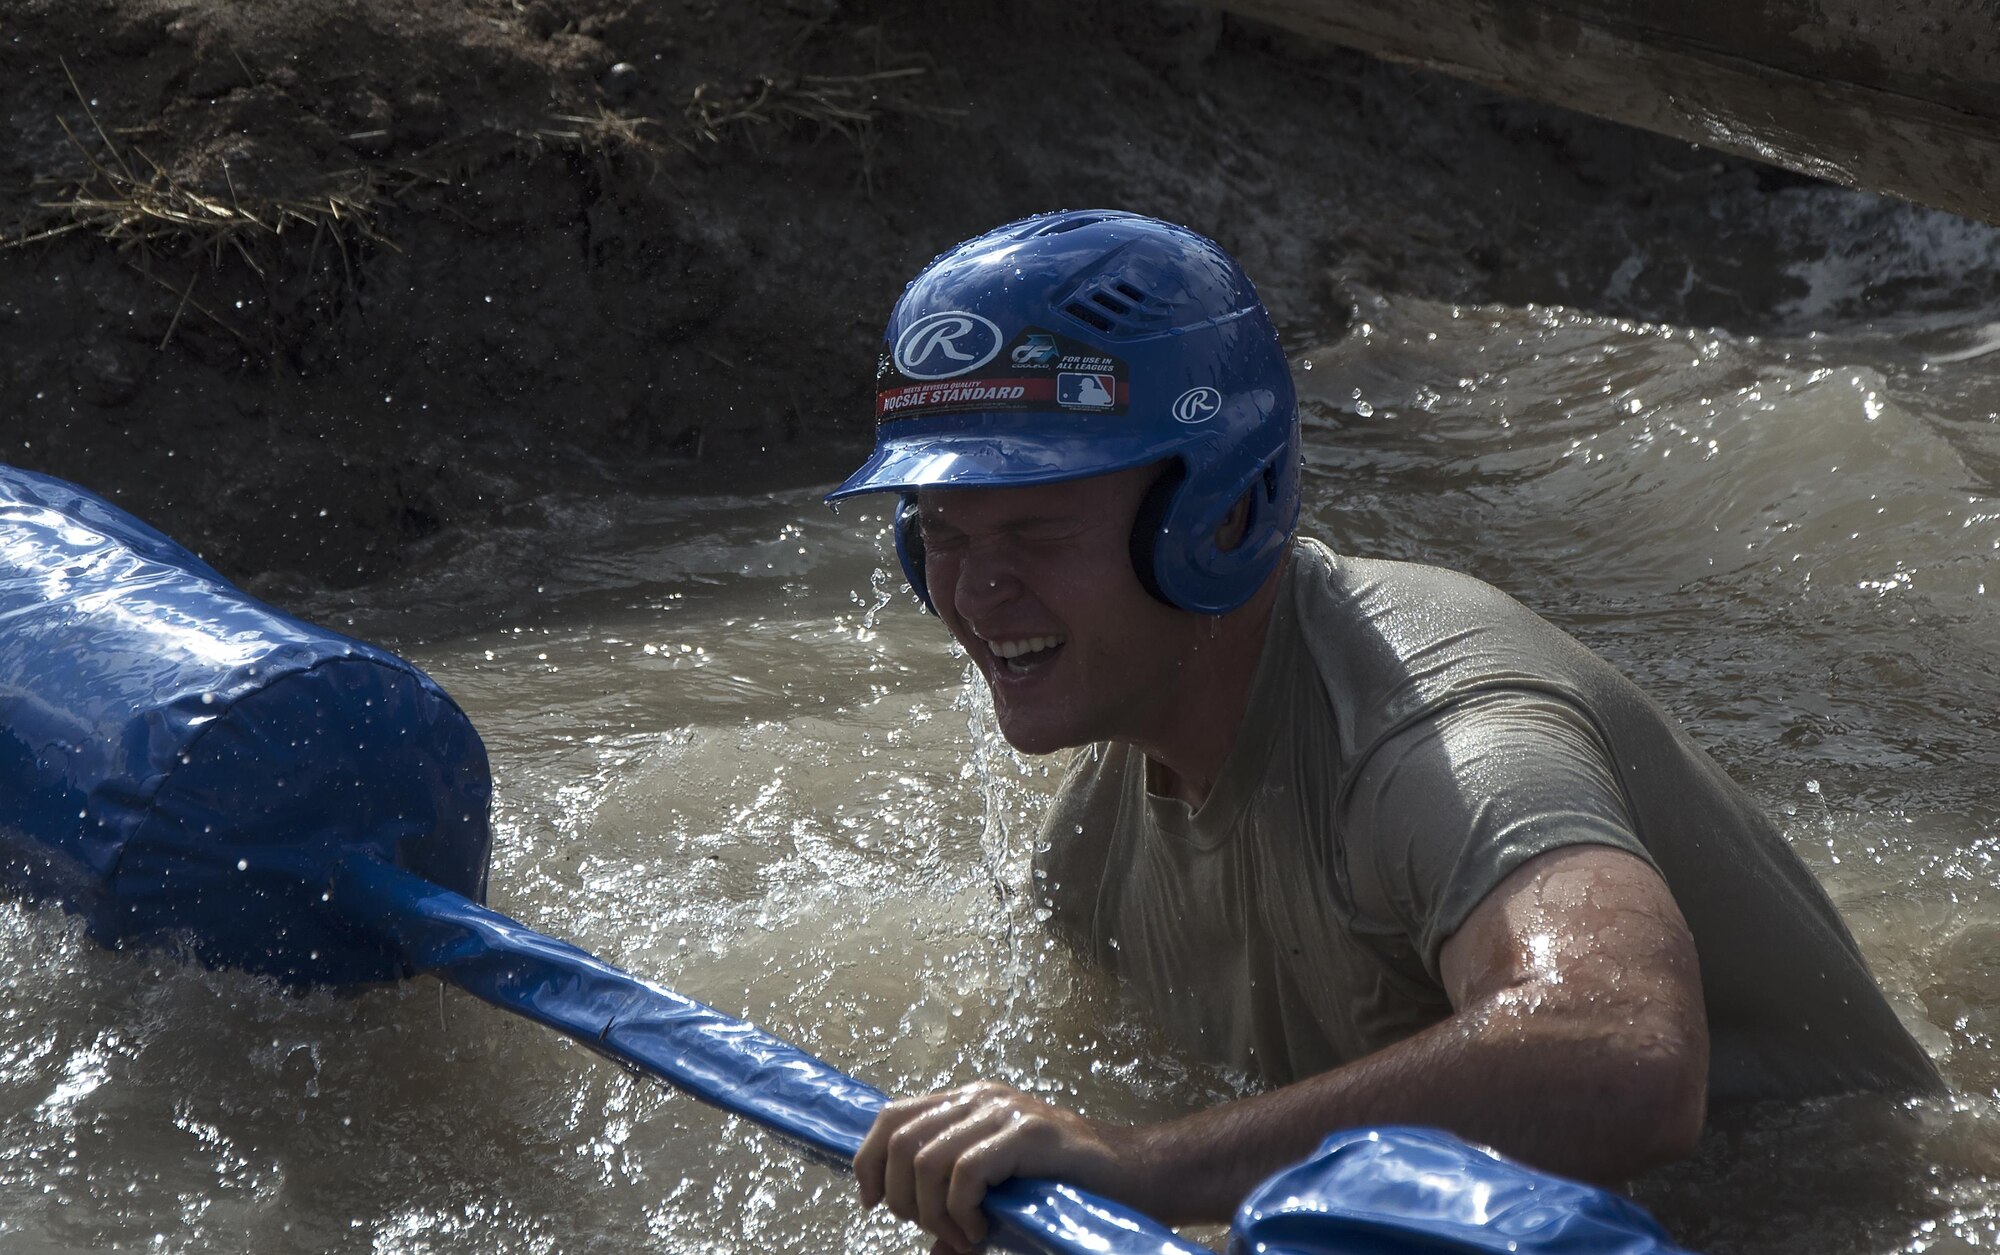 Charles Bower, 790th Missile Security Forces Squadron Tactical Response Force member, emerges from a water pit during the annual Frontiercade jousting competition at F.E. Warren Air Force Base, Wyo., Aug. 19, 2016. Contestants had to balance on a log while trying to knock off their opponent with a pugil stick. (U.S. Air Force photo by Senior Airman Brandon Valle)